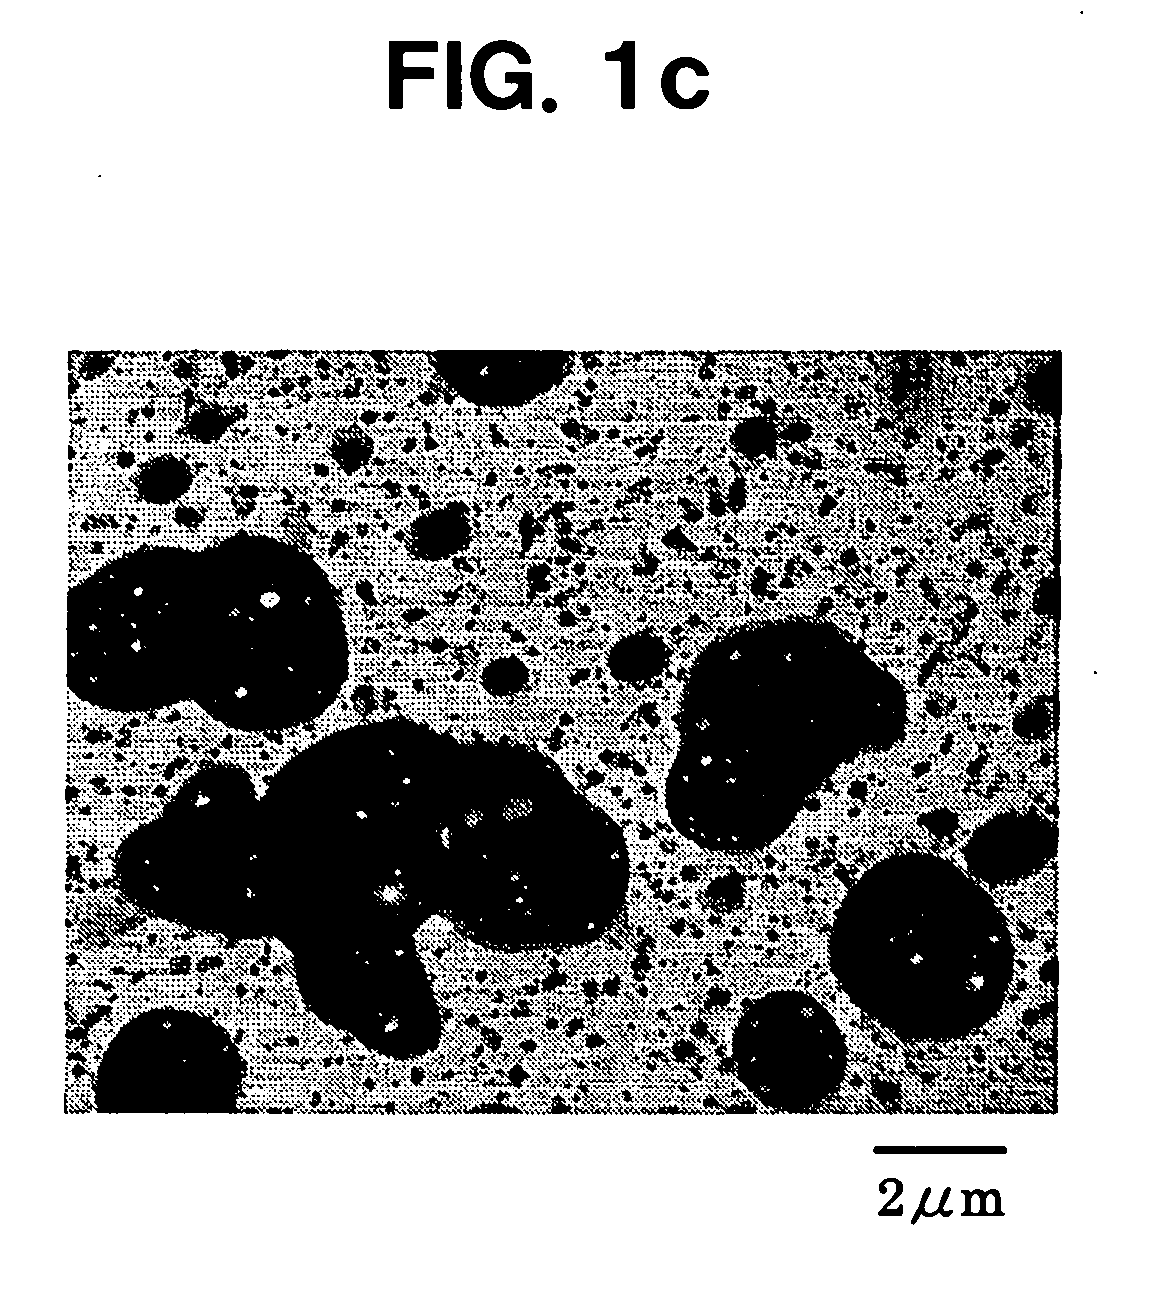 Environmental raw material capable of providing impact resistance, method of producing the same, and moldings